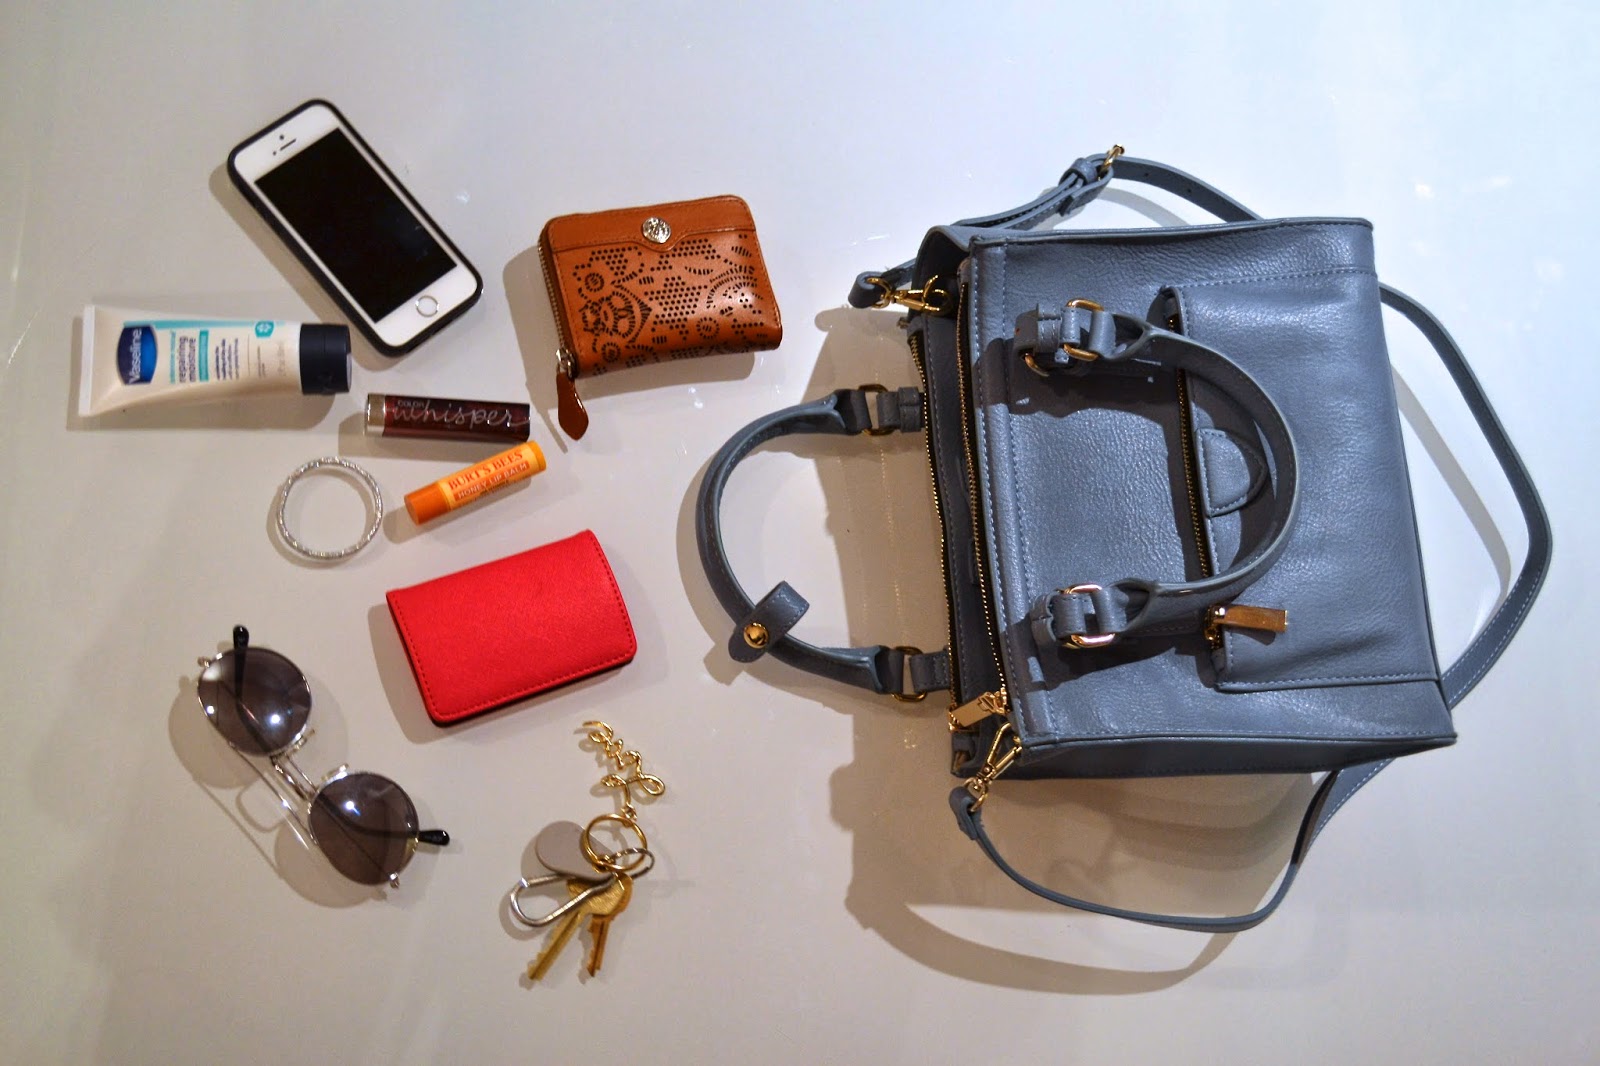 P.S. Truly Yours: What's in Your Handbag?